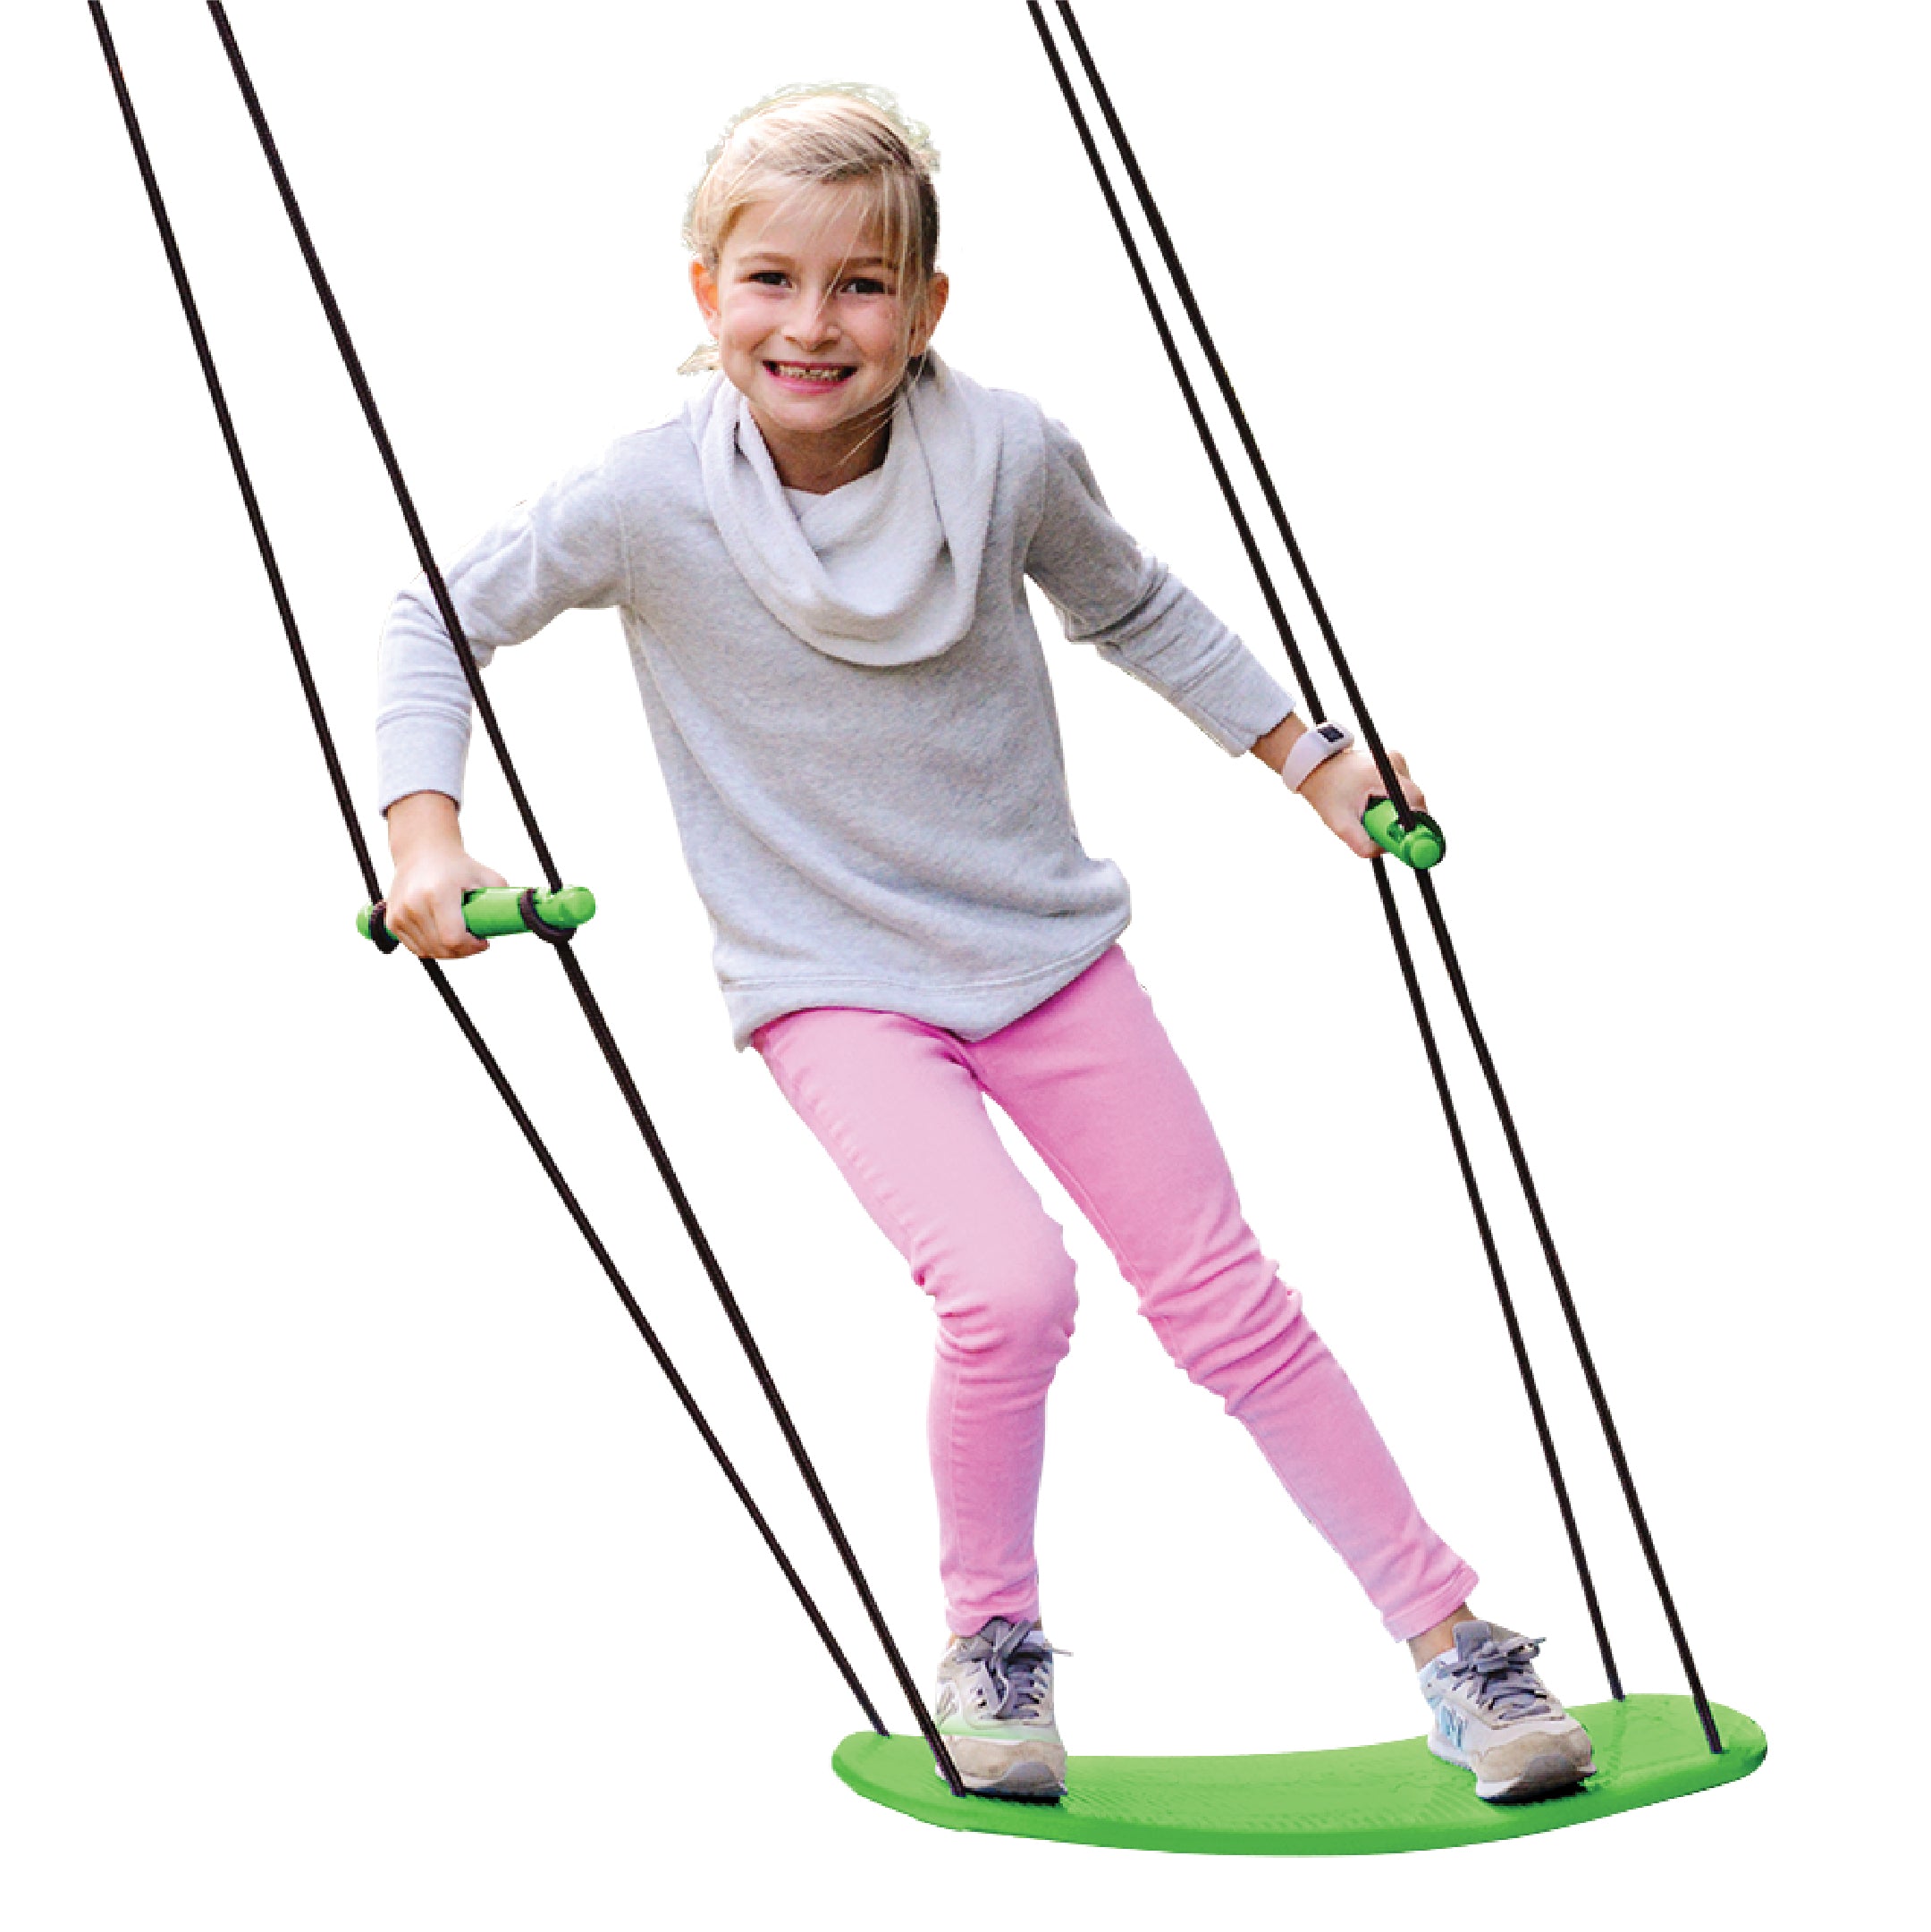 Swurfer Kick Stand Up Outdoor Surfing Tree Swing for Kids Up to 15